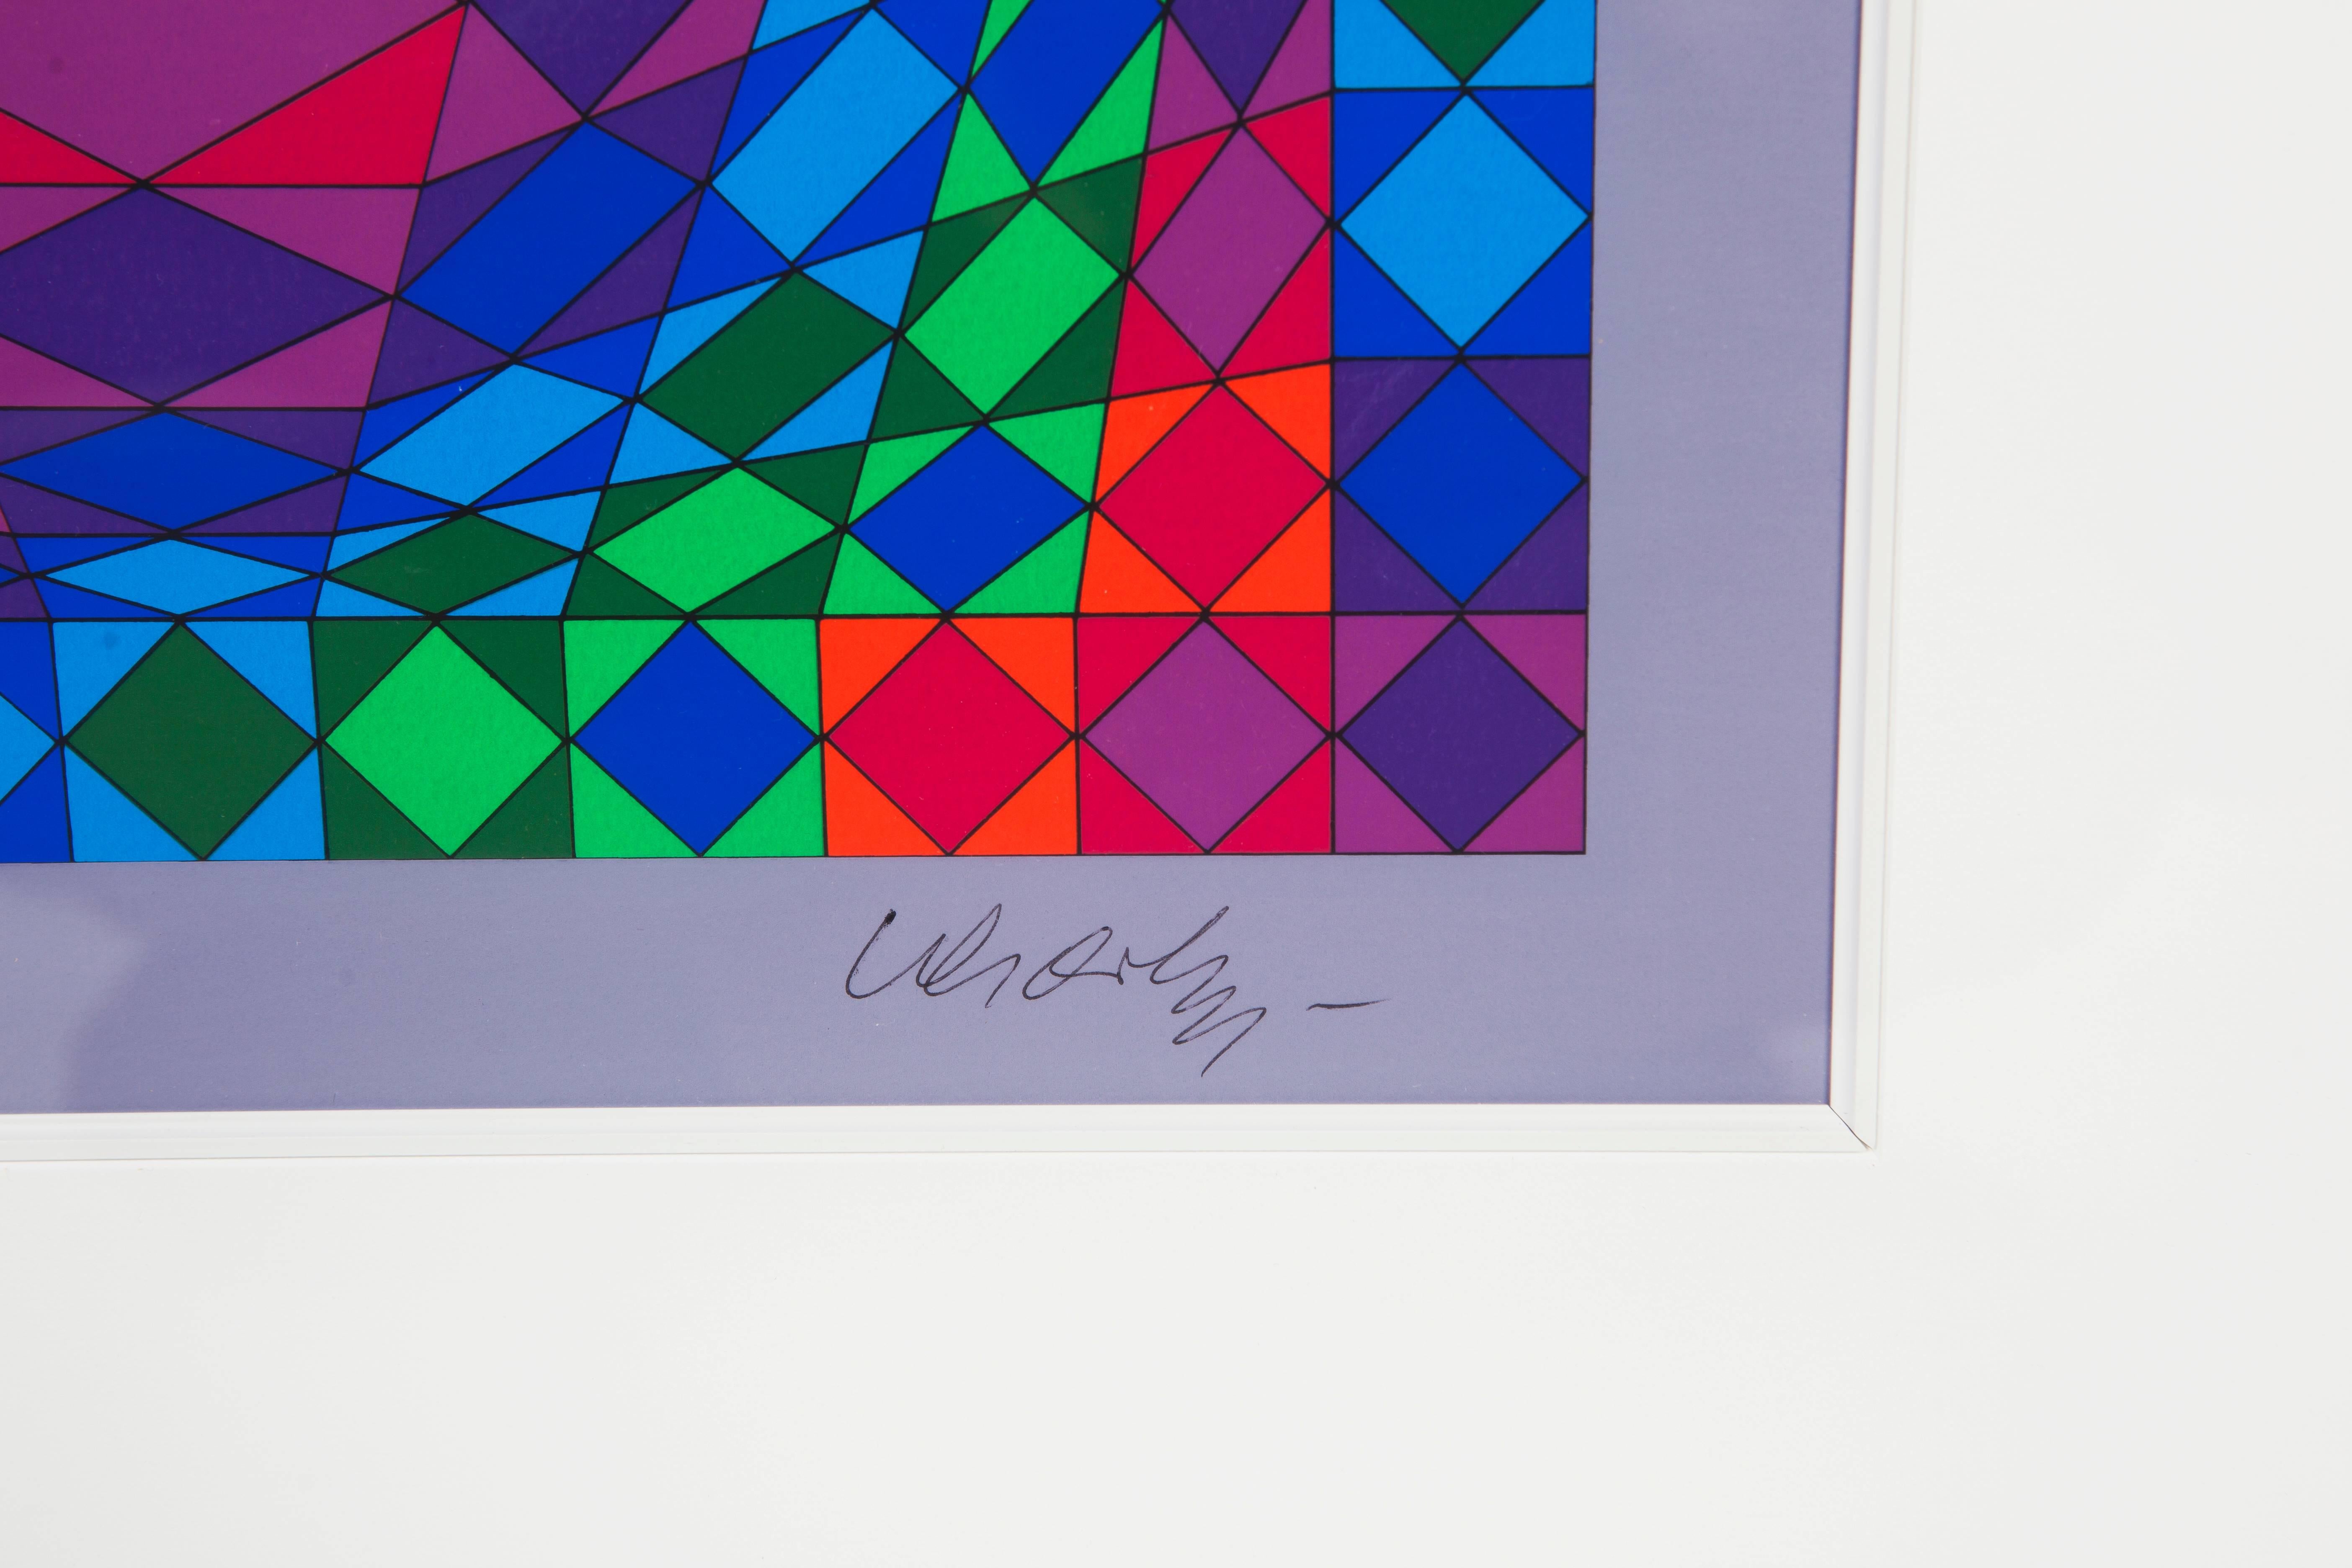 Beautiful signed and numbered (32 of 100) geometric serigraph by Victor Vasarely.
The image size is: 25.5 x 25.5 / framed size: 37.25 x 37.25.